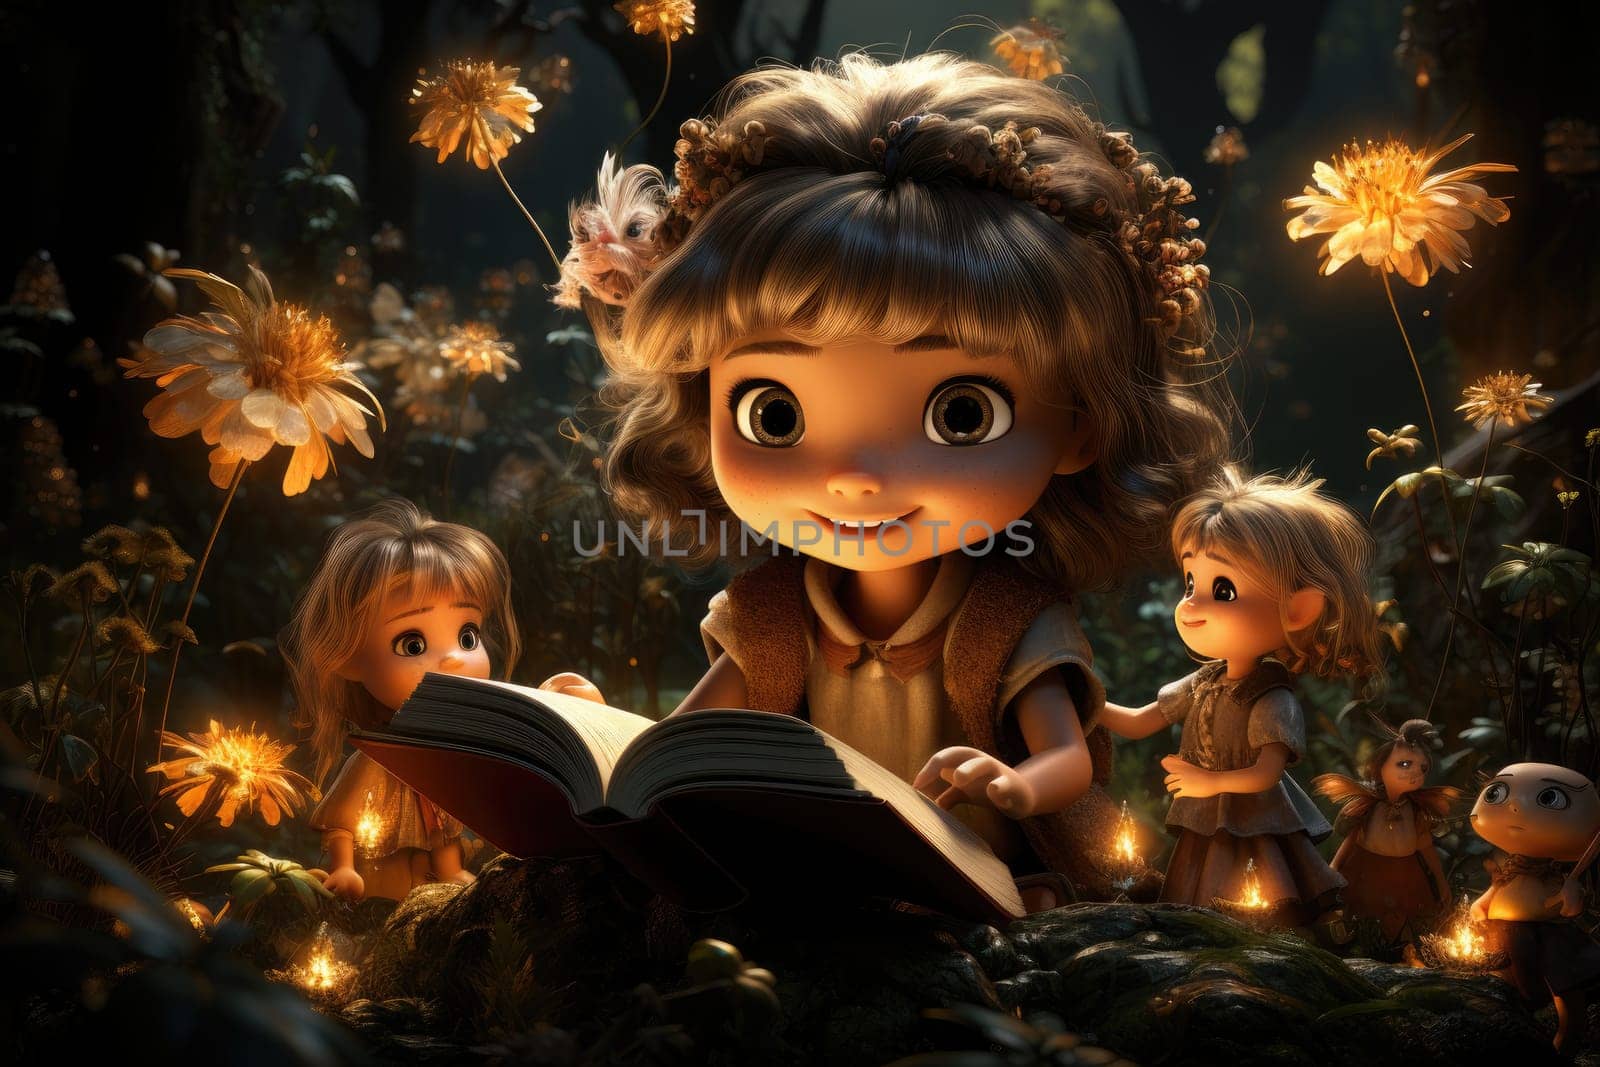 The drawing depicts beautiful fairies surrounded by an amazingly beautiful magical forest. They gathered around the book of wisdom, studying its pages and immersing themselves in the world of knowledge.